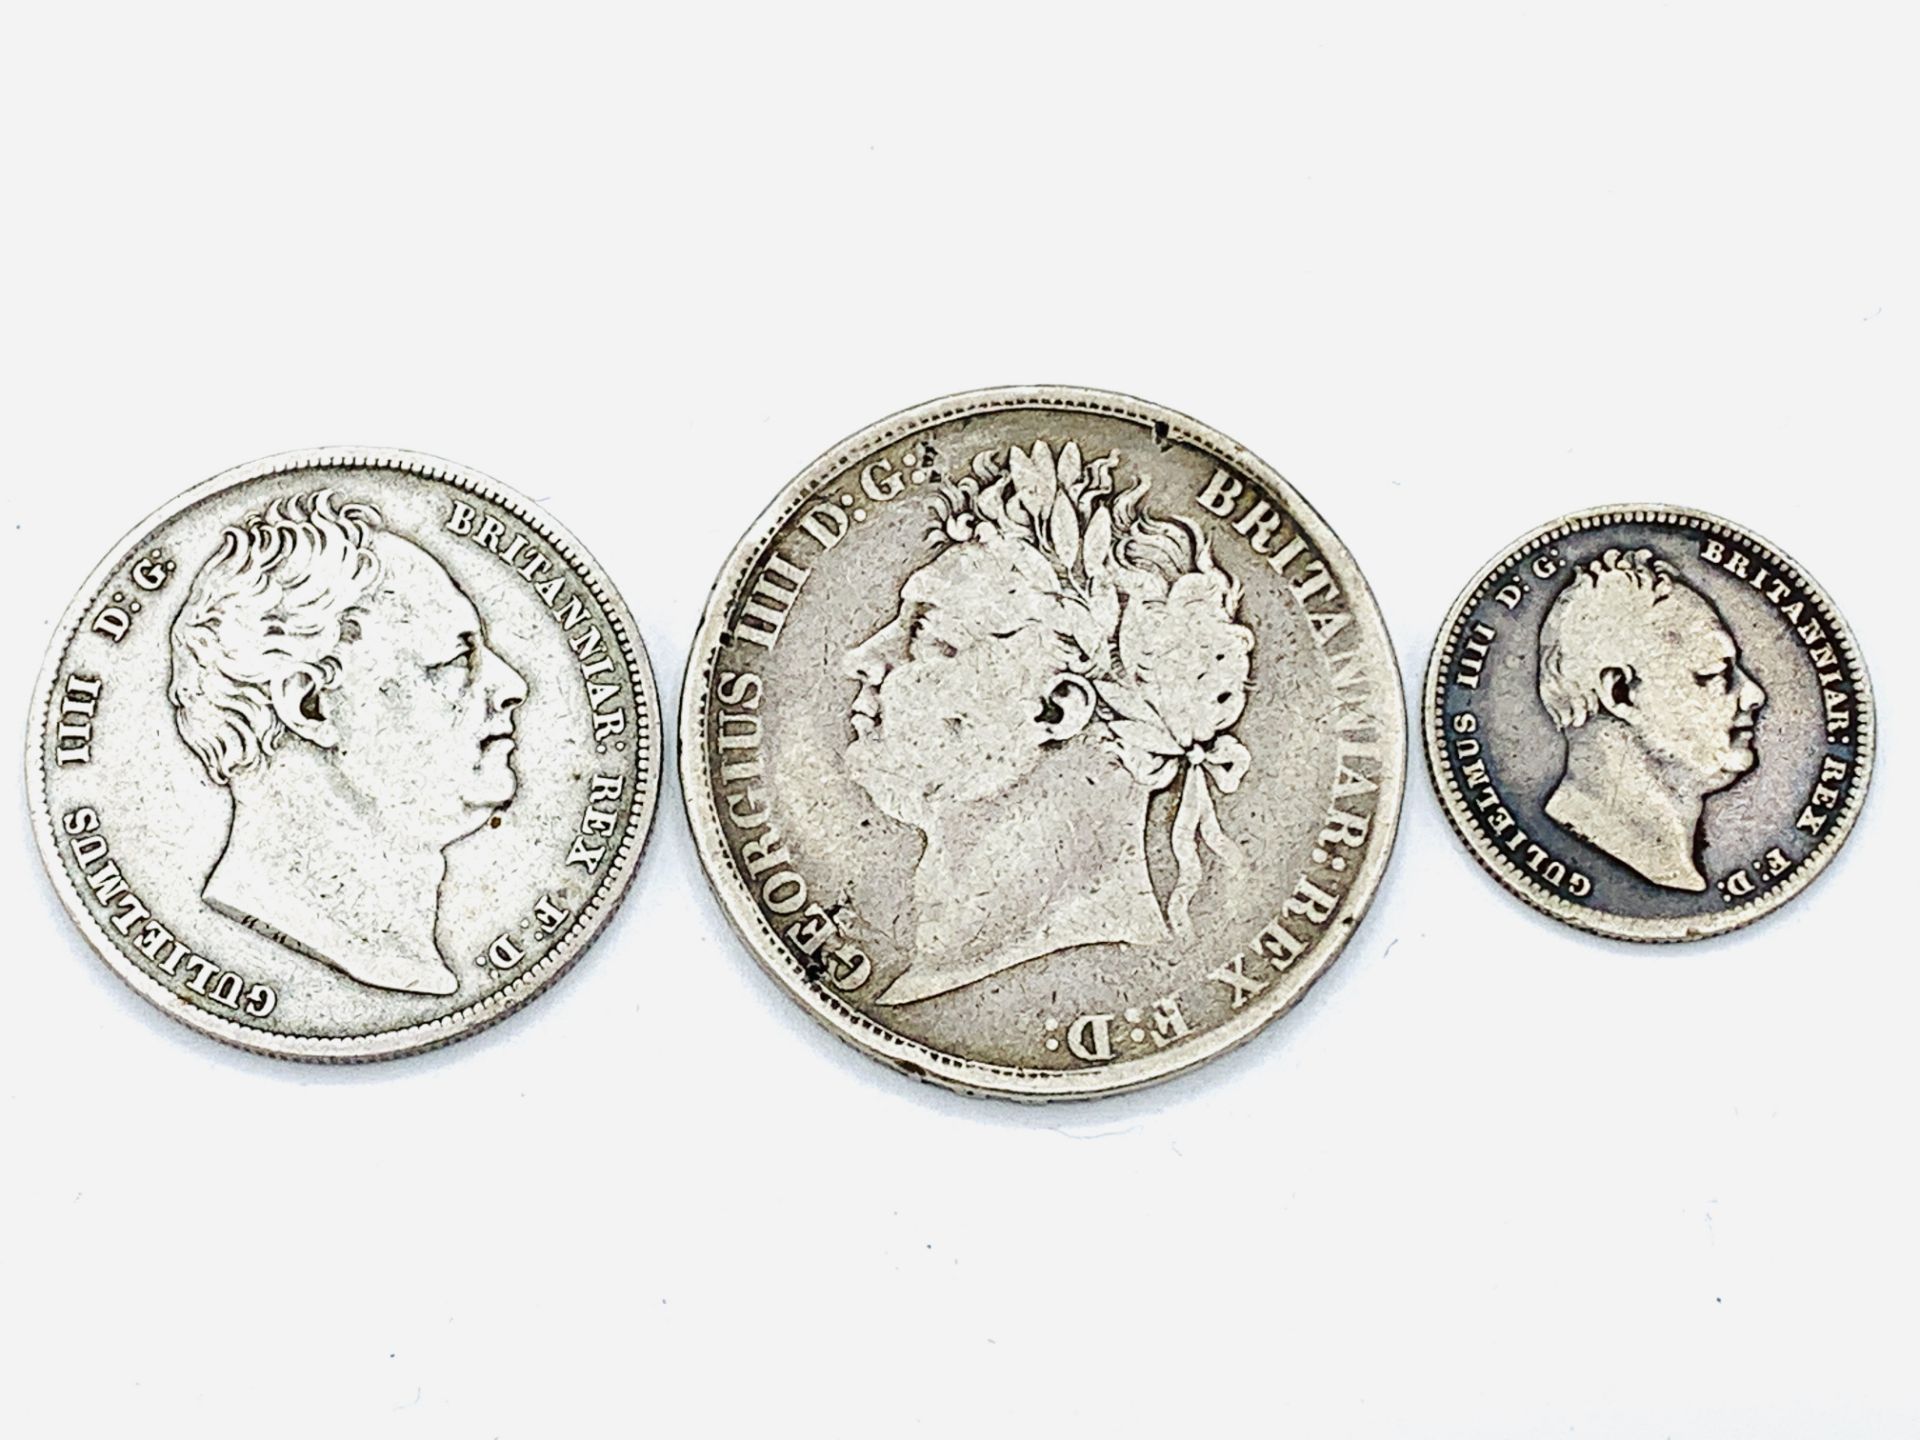 George IV Crown 1822, a William IV half crown 1837 and a William IV shilling 1834